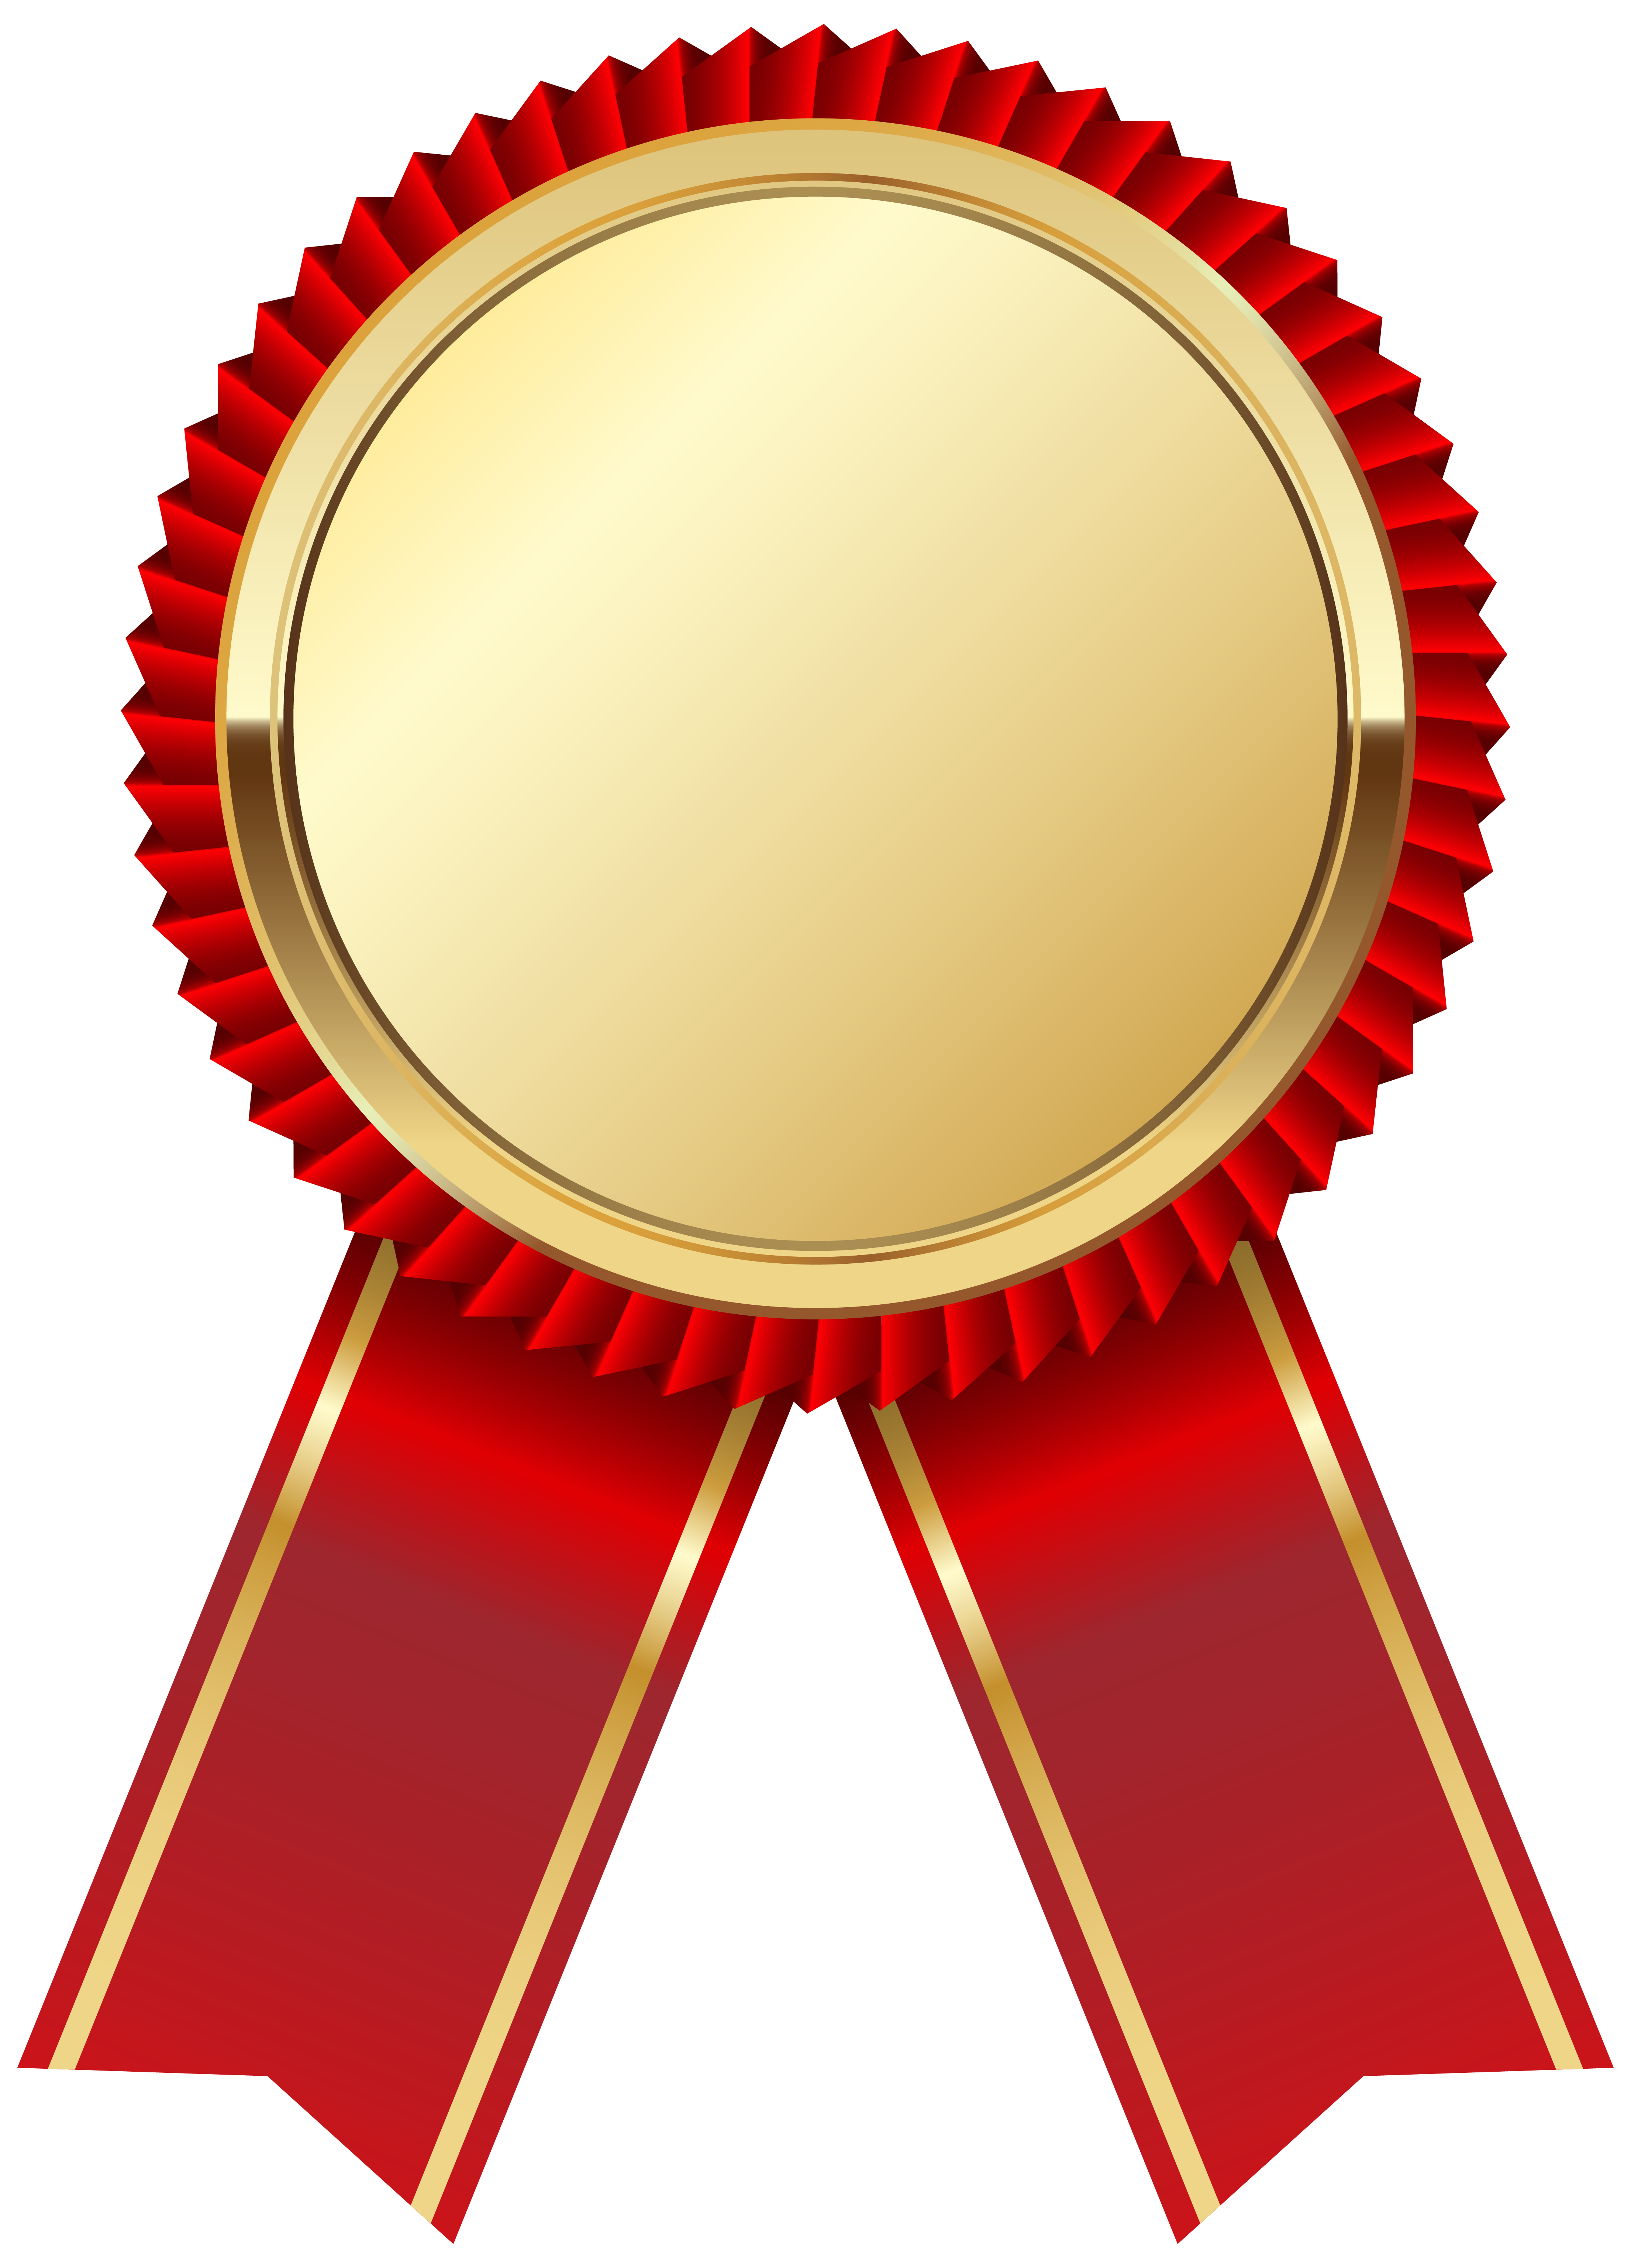 Images of Medal | 4420x6145